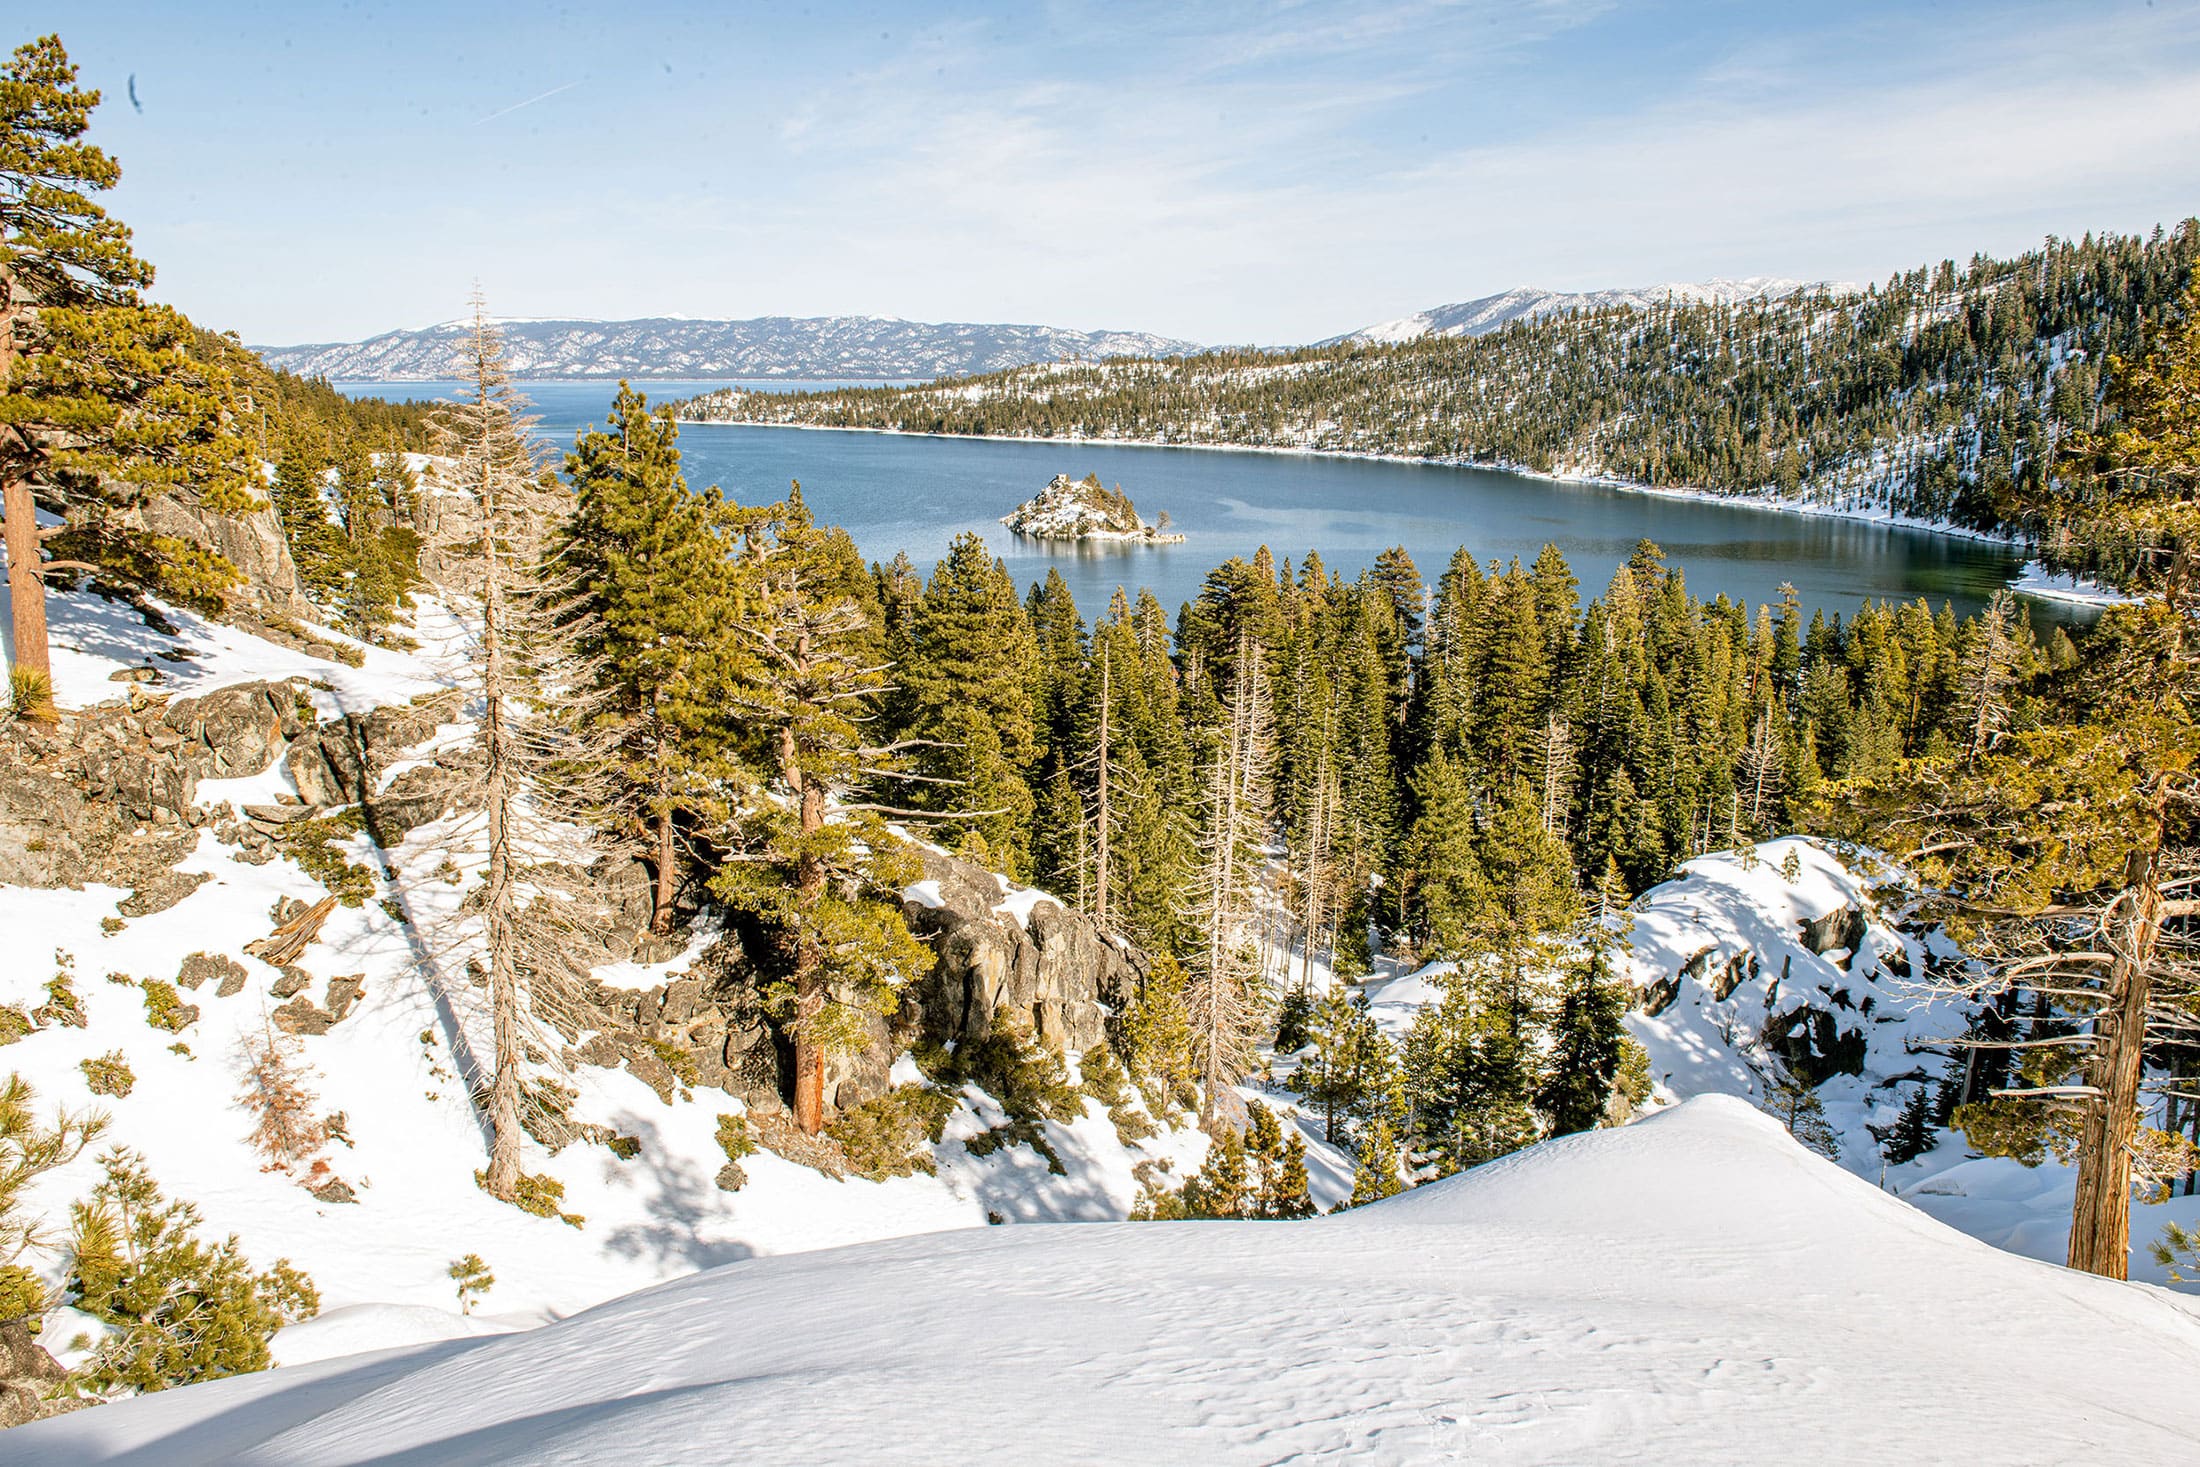 Book Your Lake Tahoe Stay at The Village